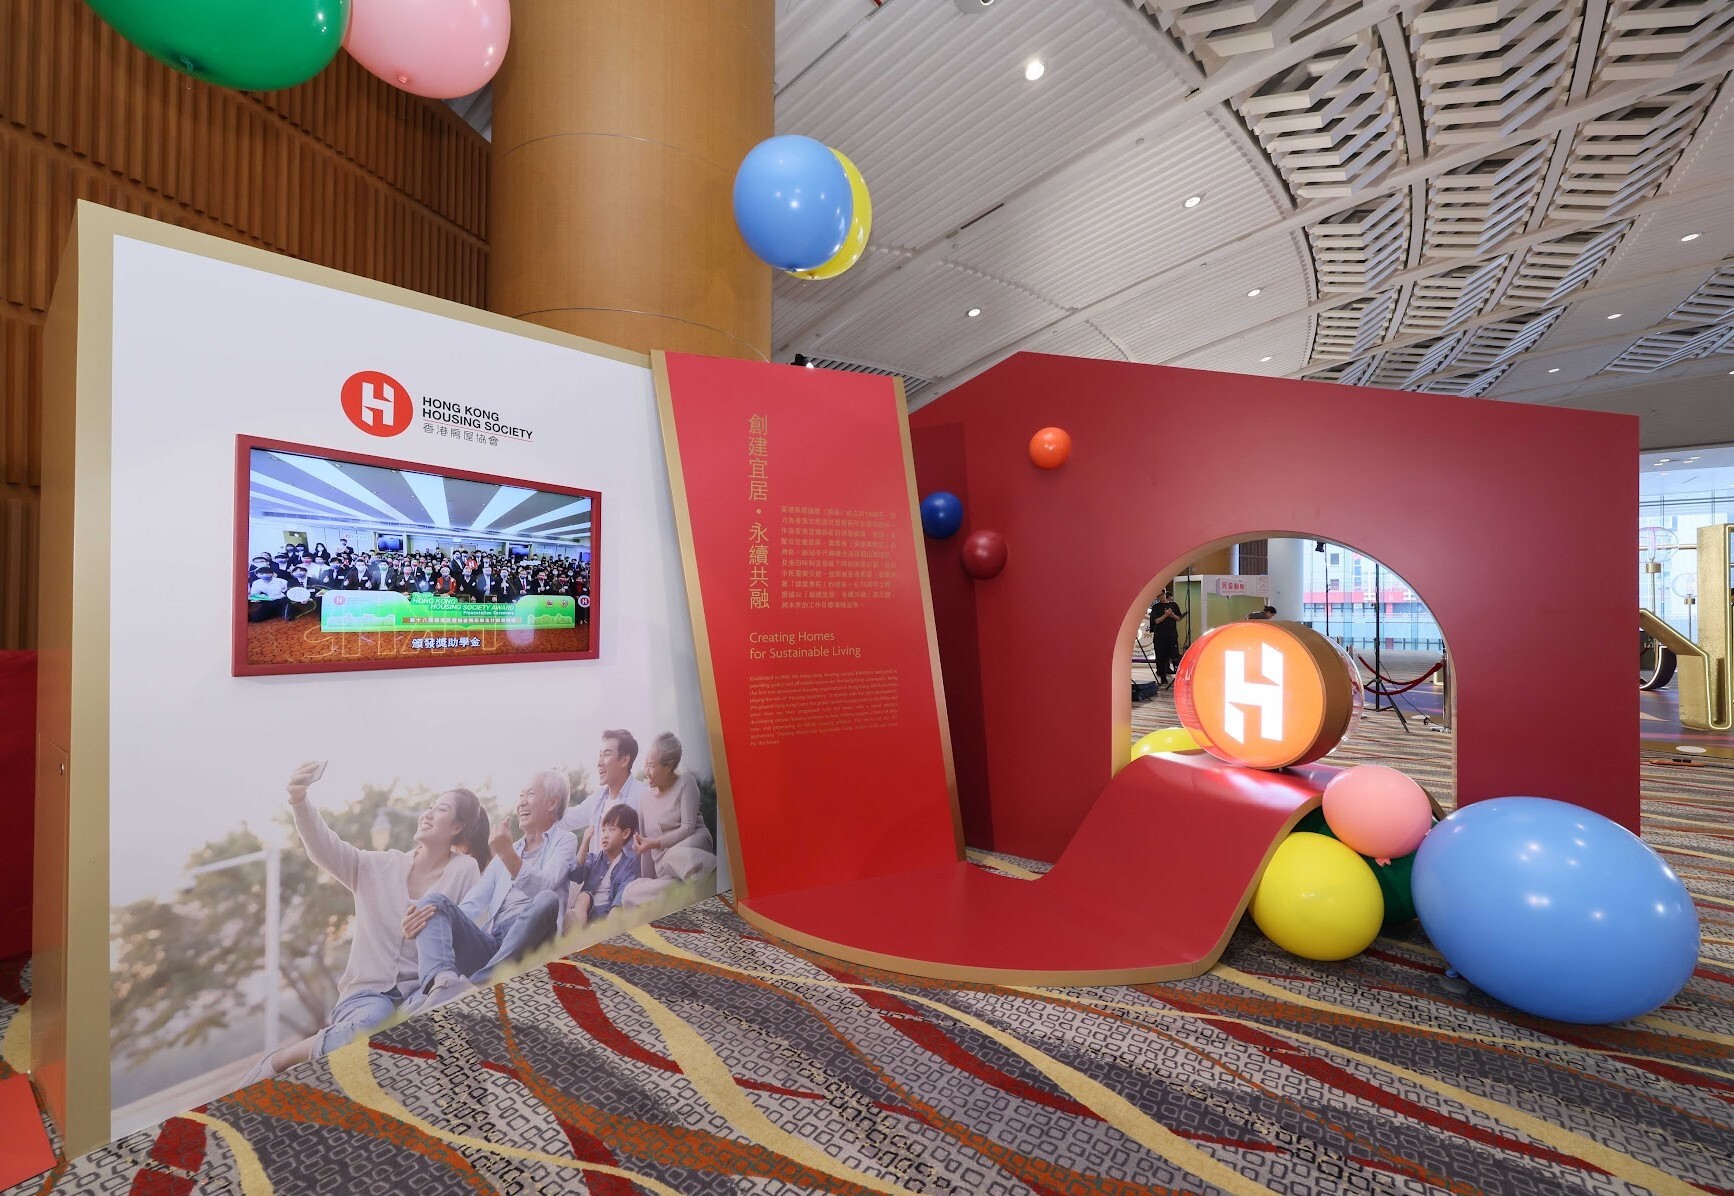 HKHS 75th Anniversary Roving Exhibition will tour around Hong Kong, Kowloon and the New Territories starting from 30 May 2023, with free admission for the public.